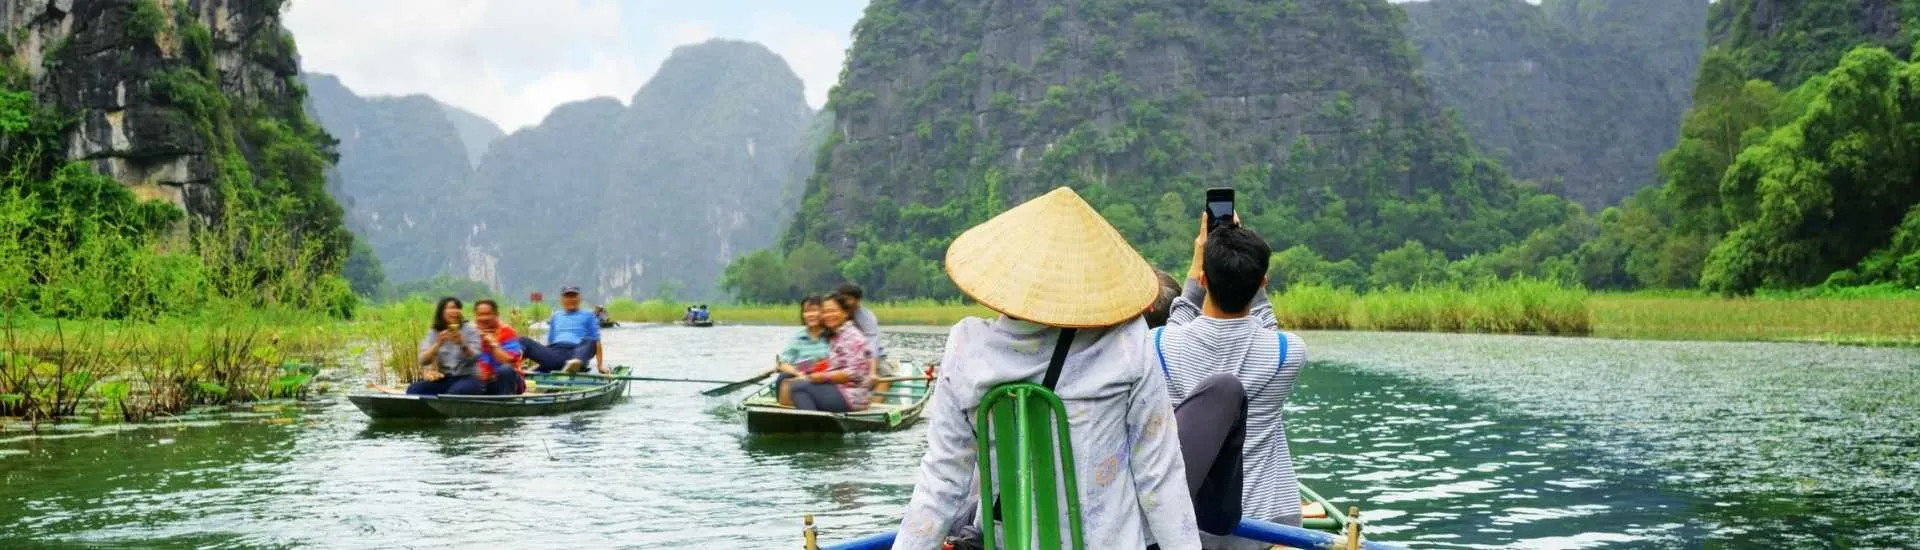 Tourists traveling in boats along the Ngo Dong River at the Tam Coc portion, Ninh Binh Province, Vietnam — Shutterstock